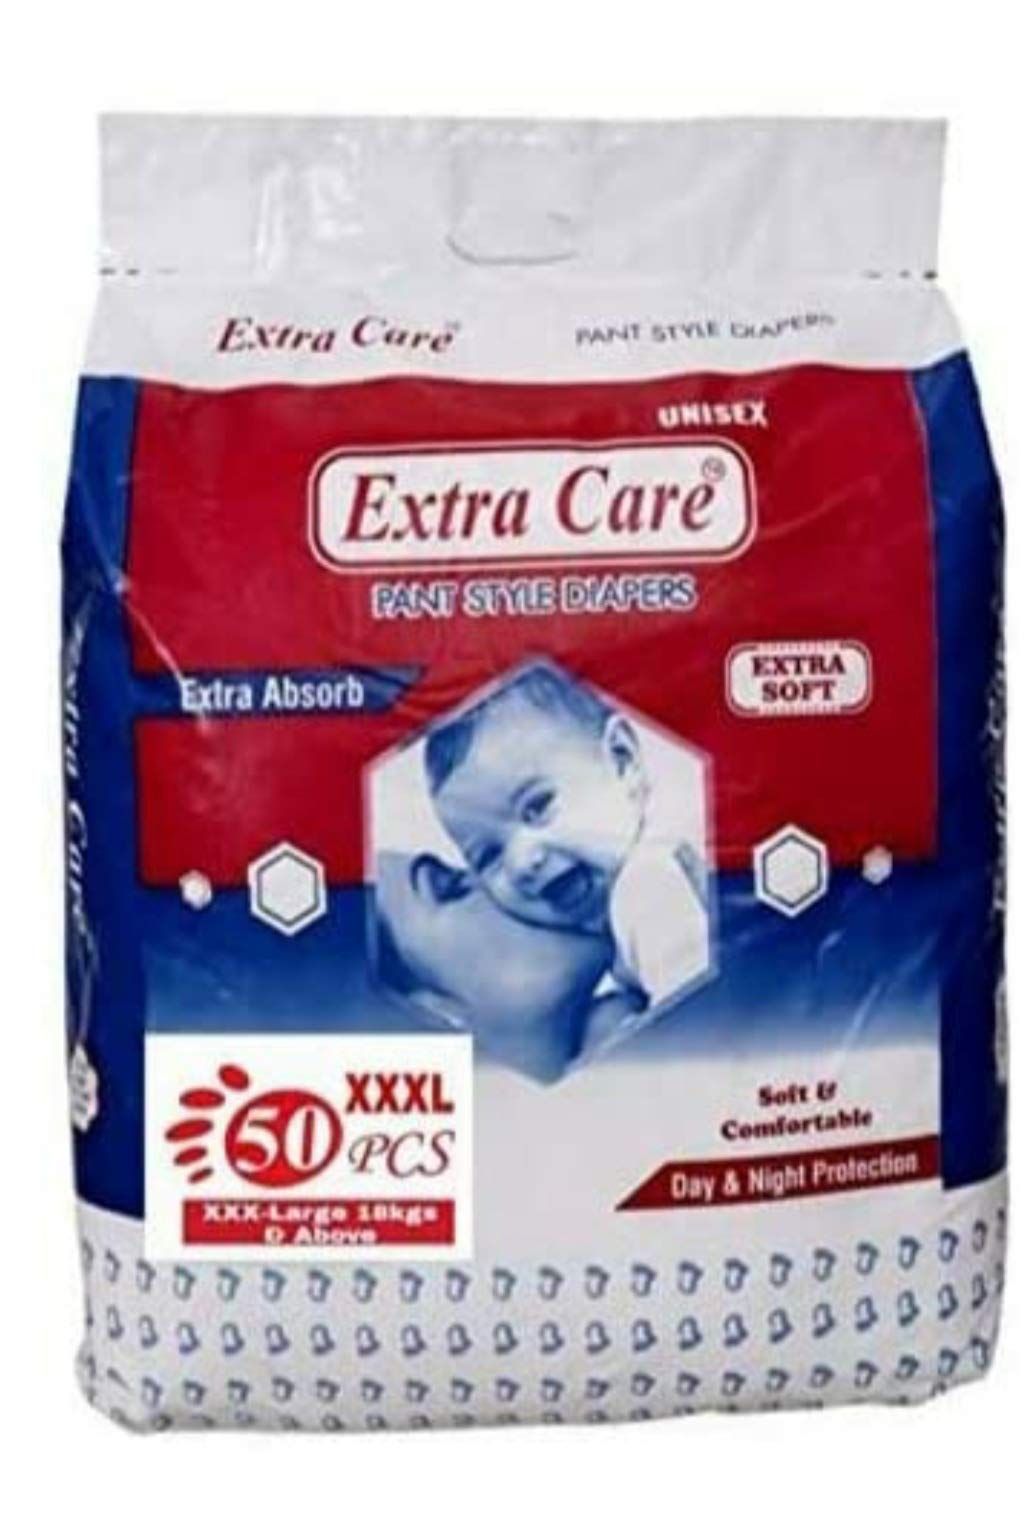 Buy Mylo Care Baby Diaper Pants Small (S) Size, 4-8 kgs with ADL Technology  - 84 Count - 12 Hours Protection Online at Low Prices in India - Amazon.in